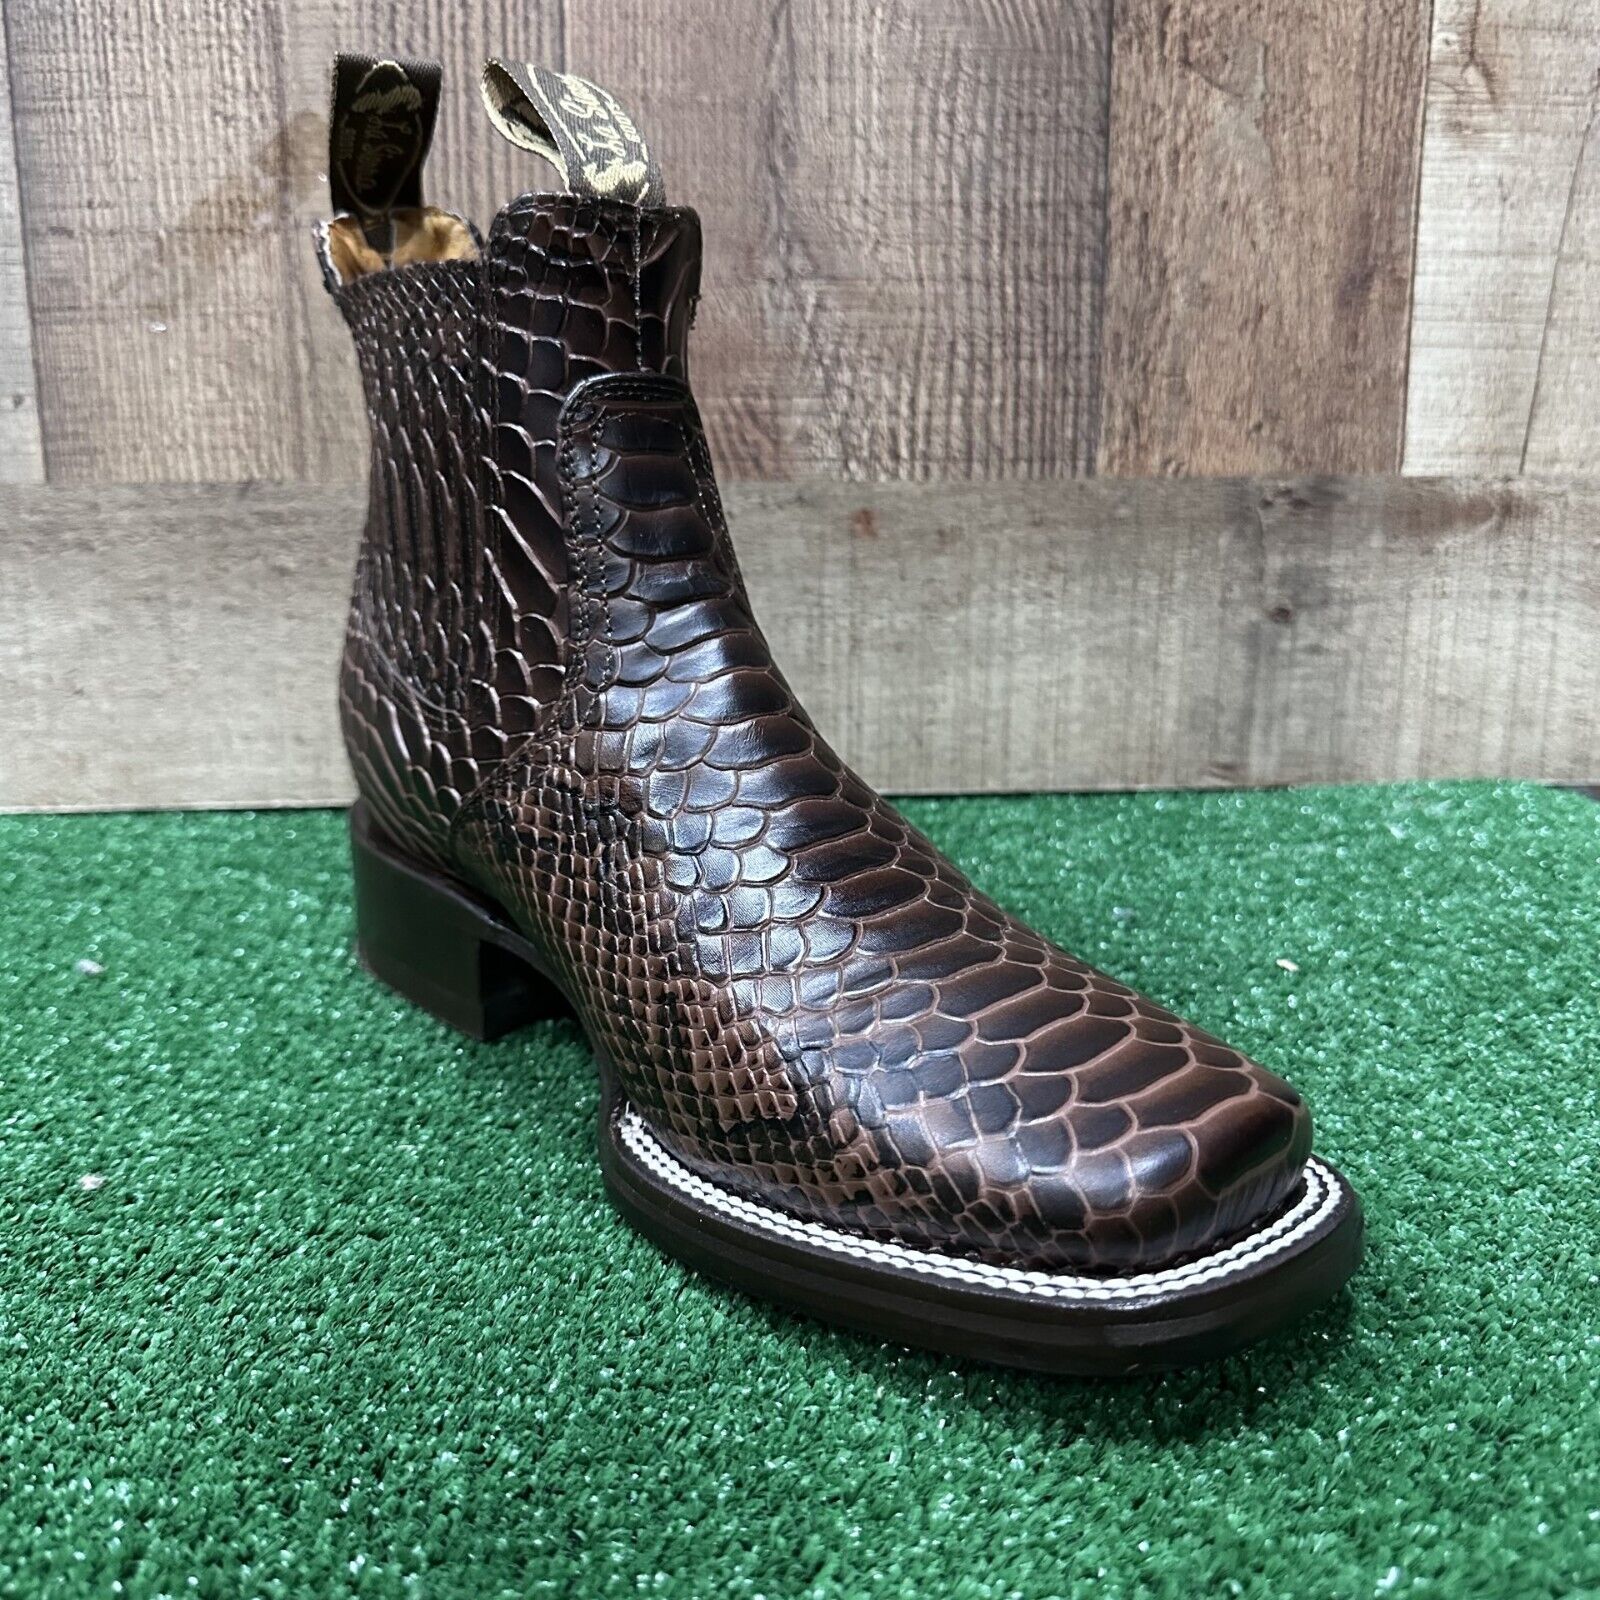 MEN'S LEATHER PYTHON PRINT WESTERN STYLE COWBOY RODEO SLIP ON ANKLE-SQUARE BOOTS